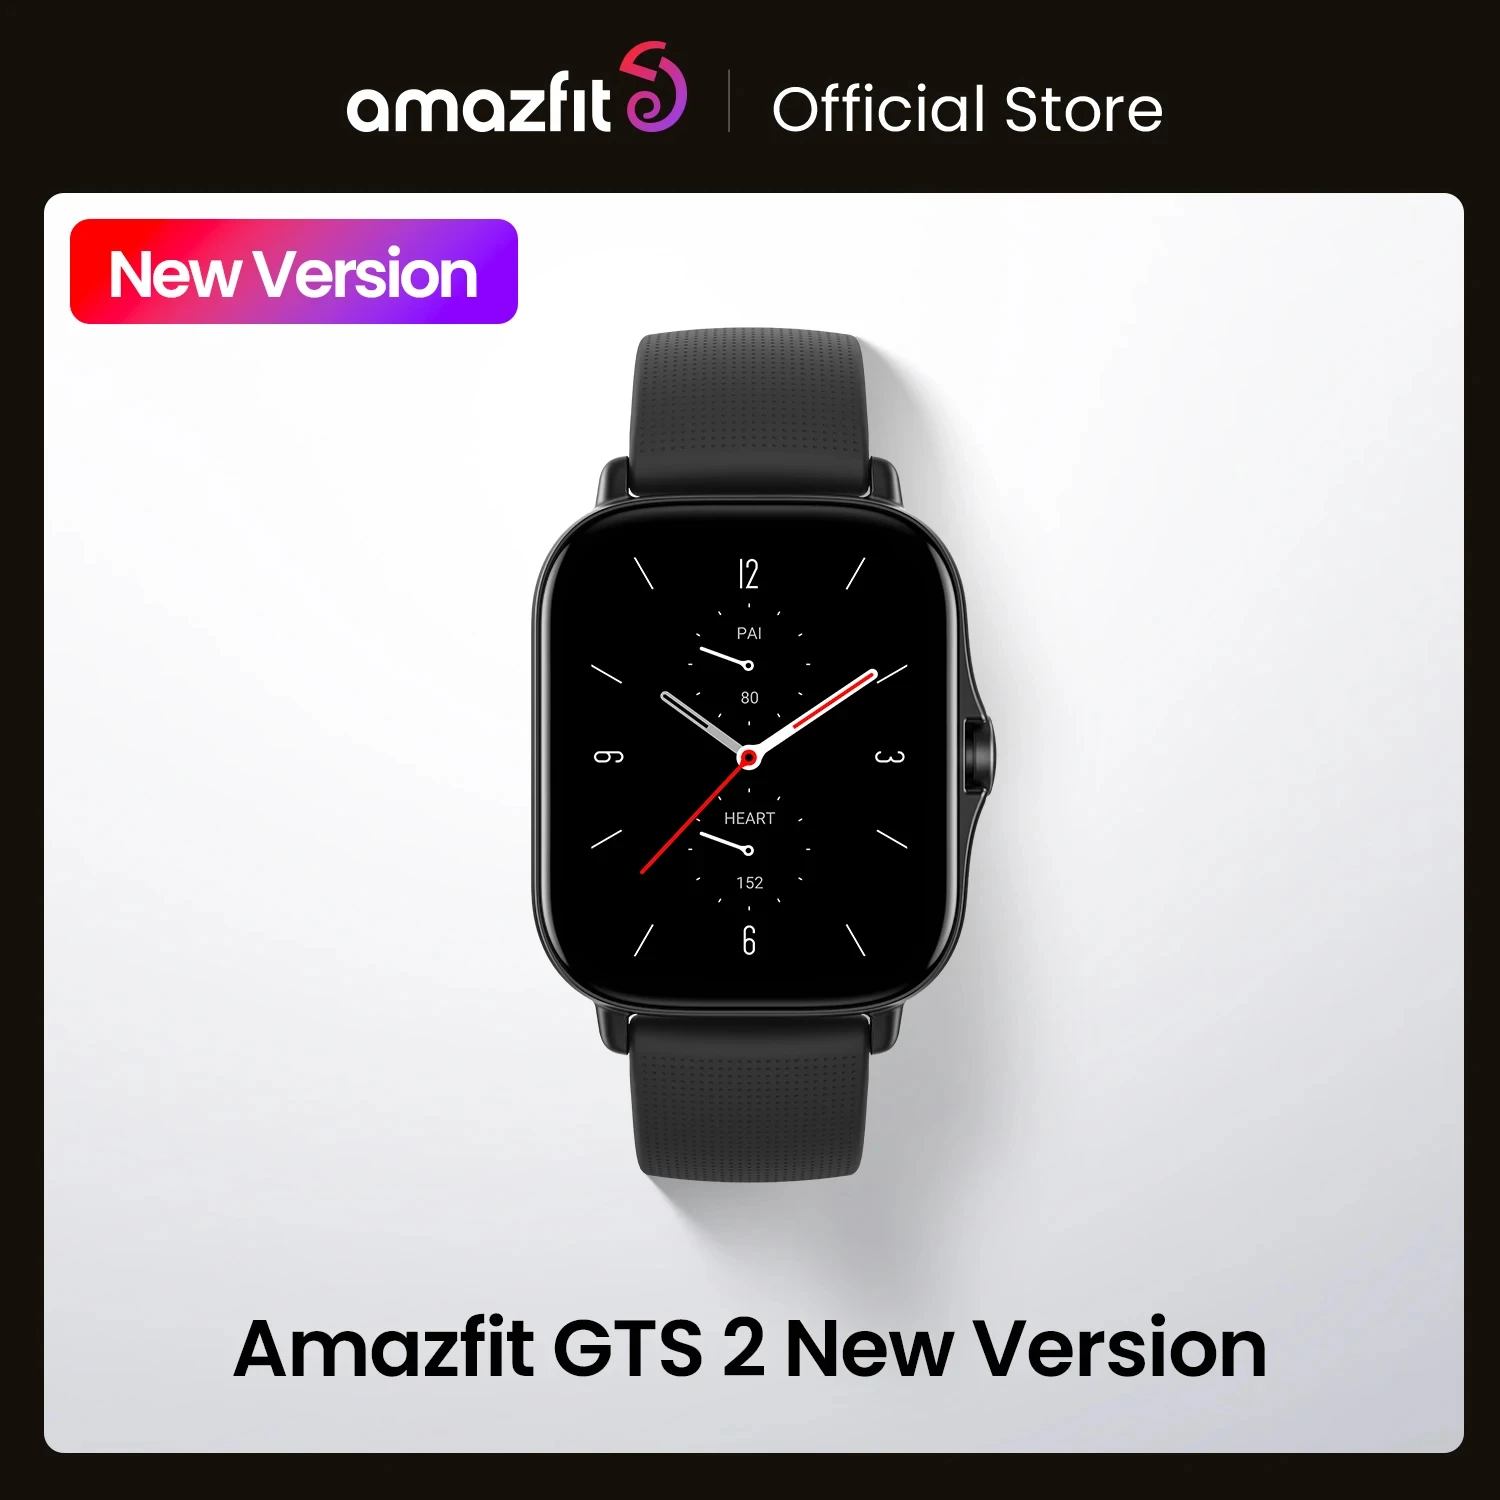 [New Version ] Amazfit GTS 2 Smartwatch All-round Health and Fitness Tracking Smart Watch Alexa Built-in For Android IOS Phone